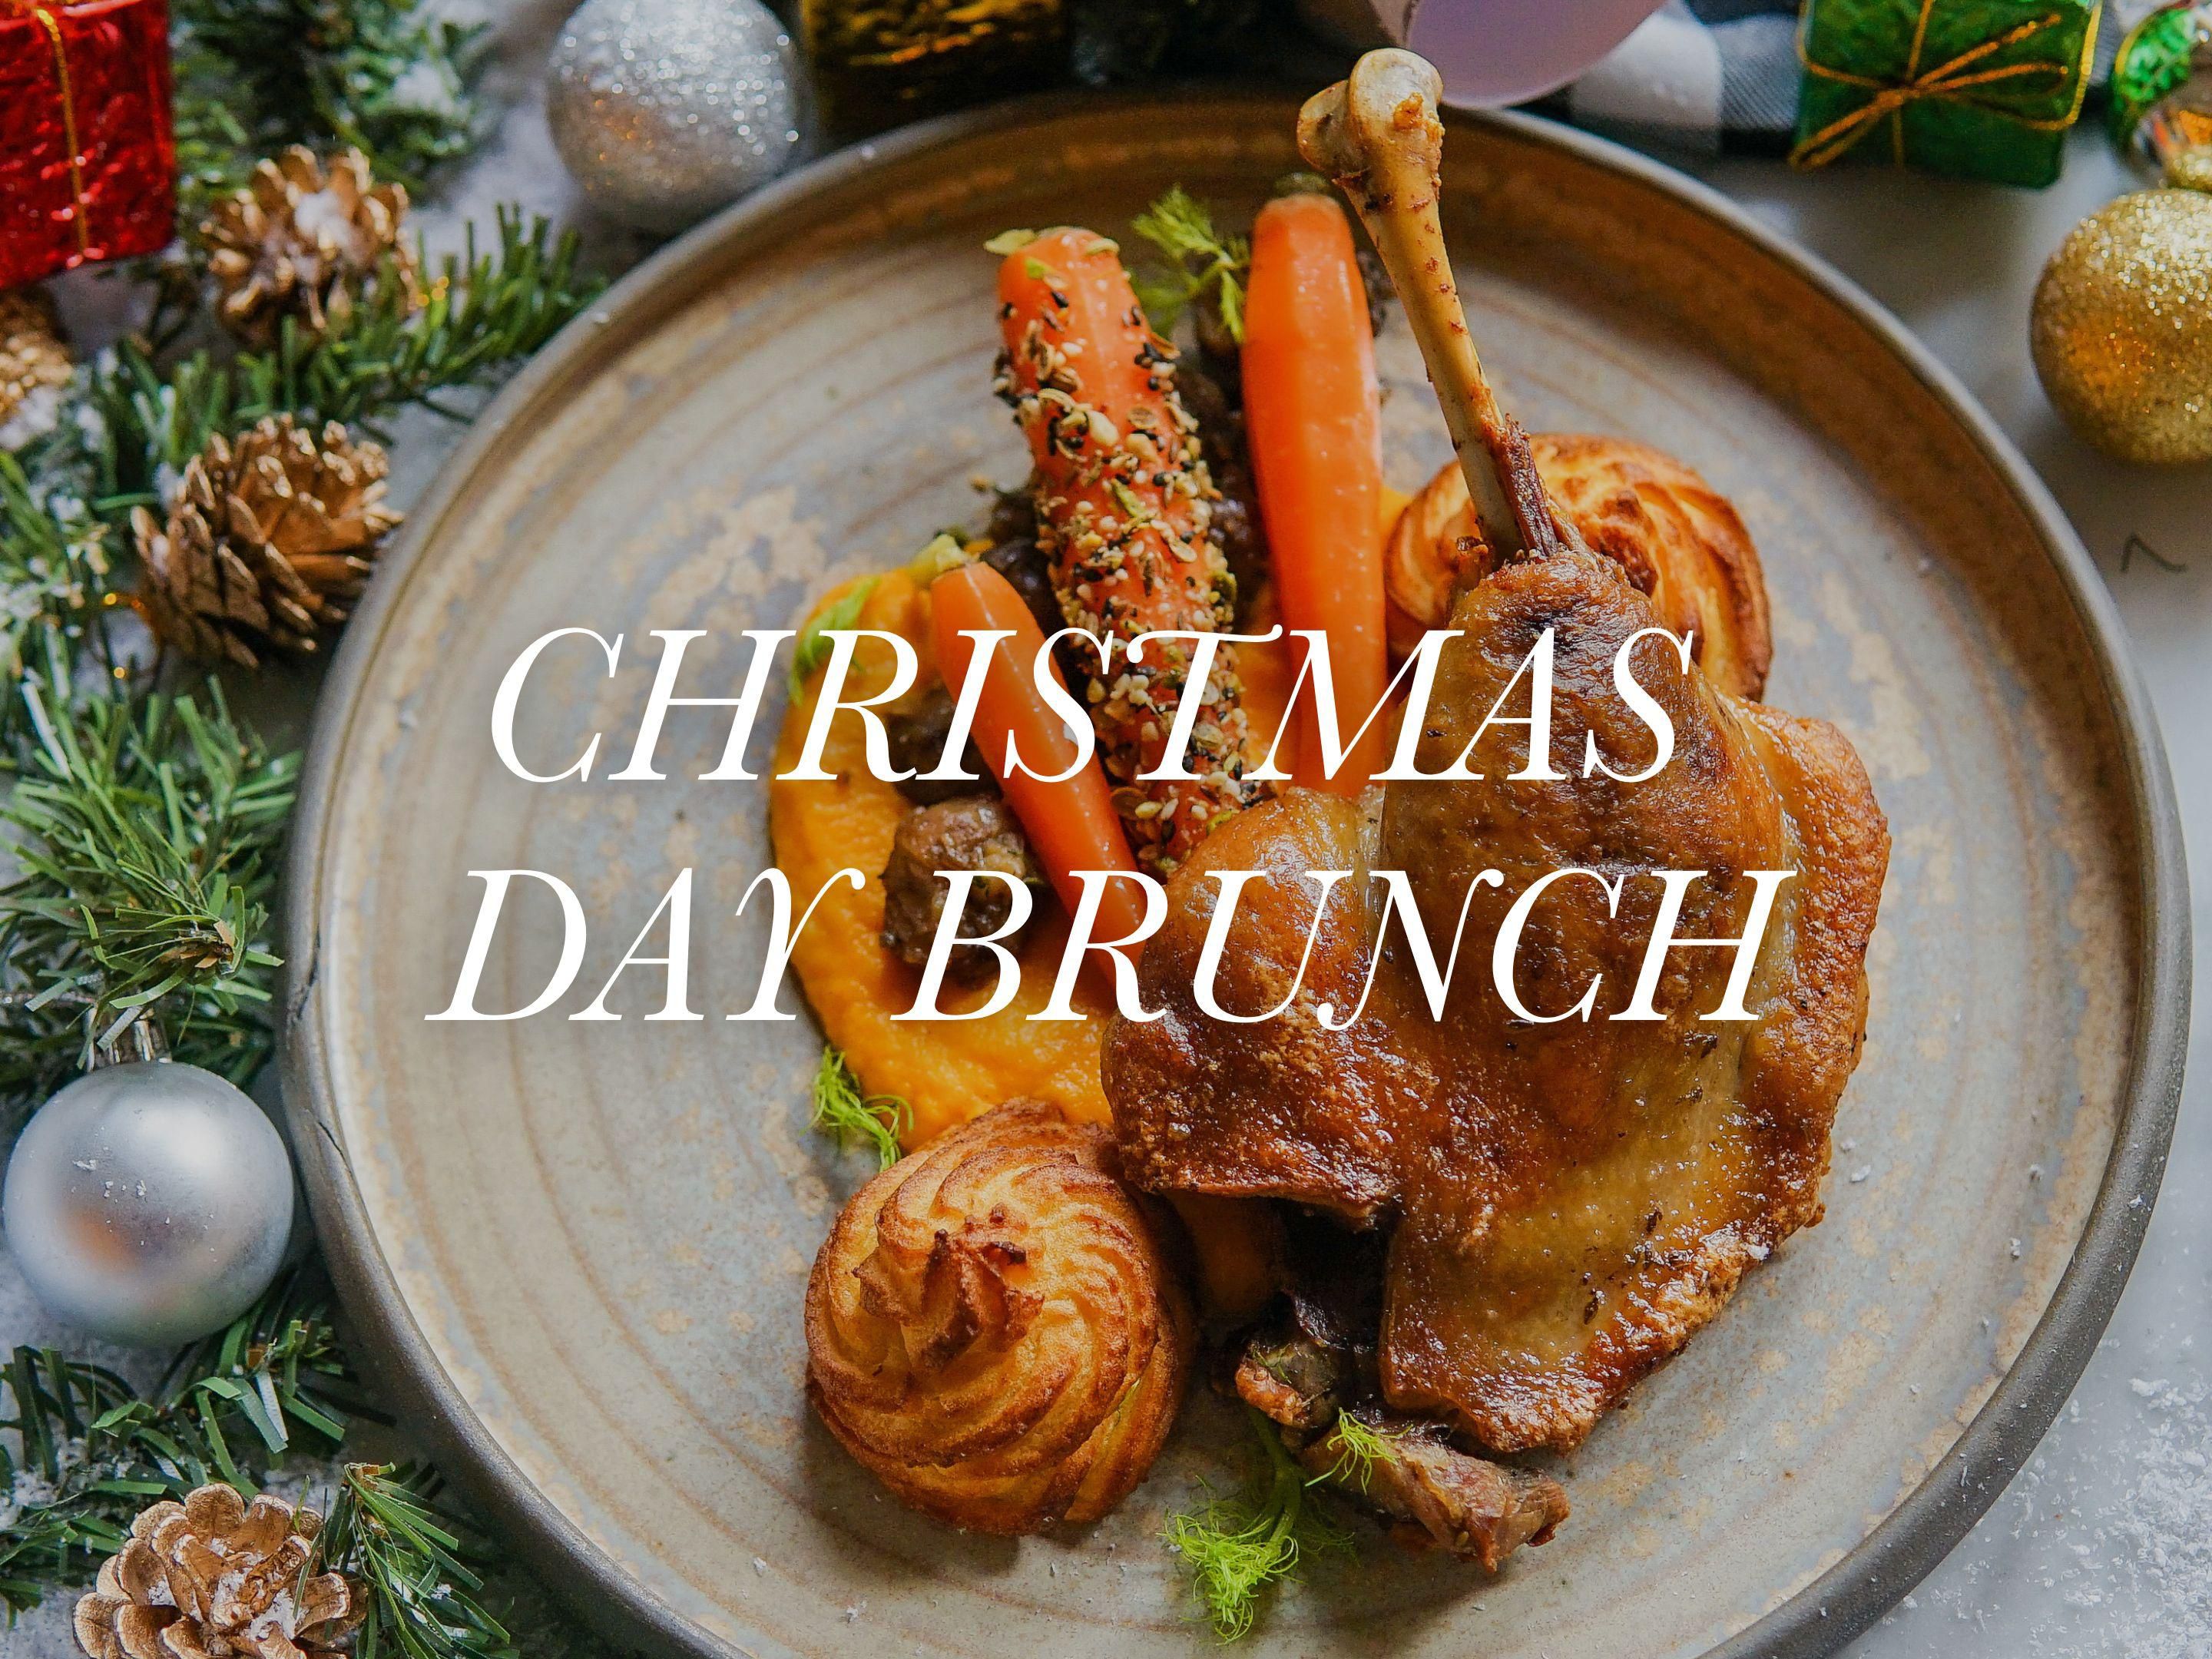 Christmas Day Brunch at The Maison